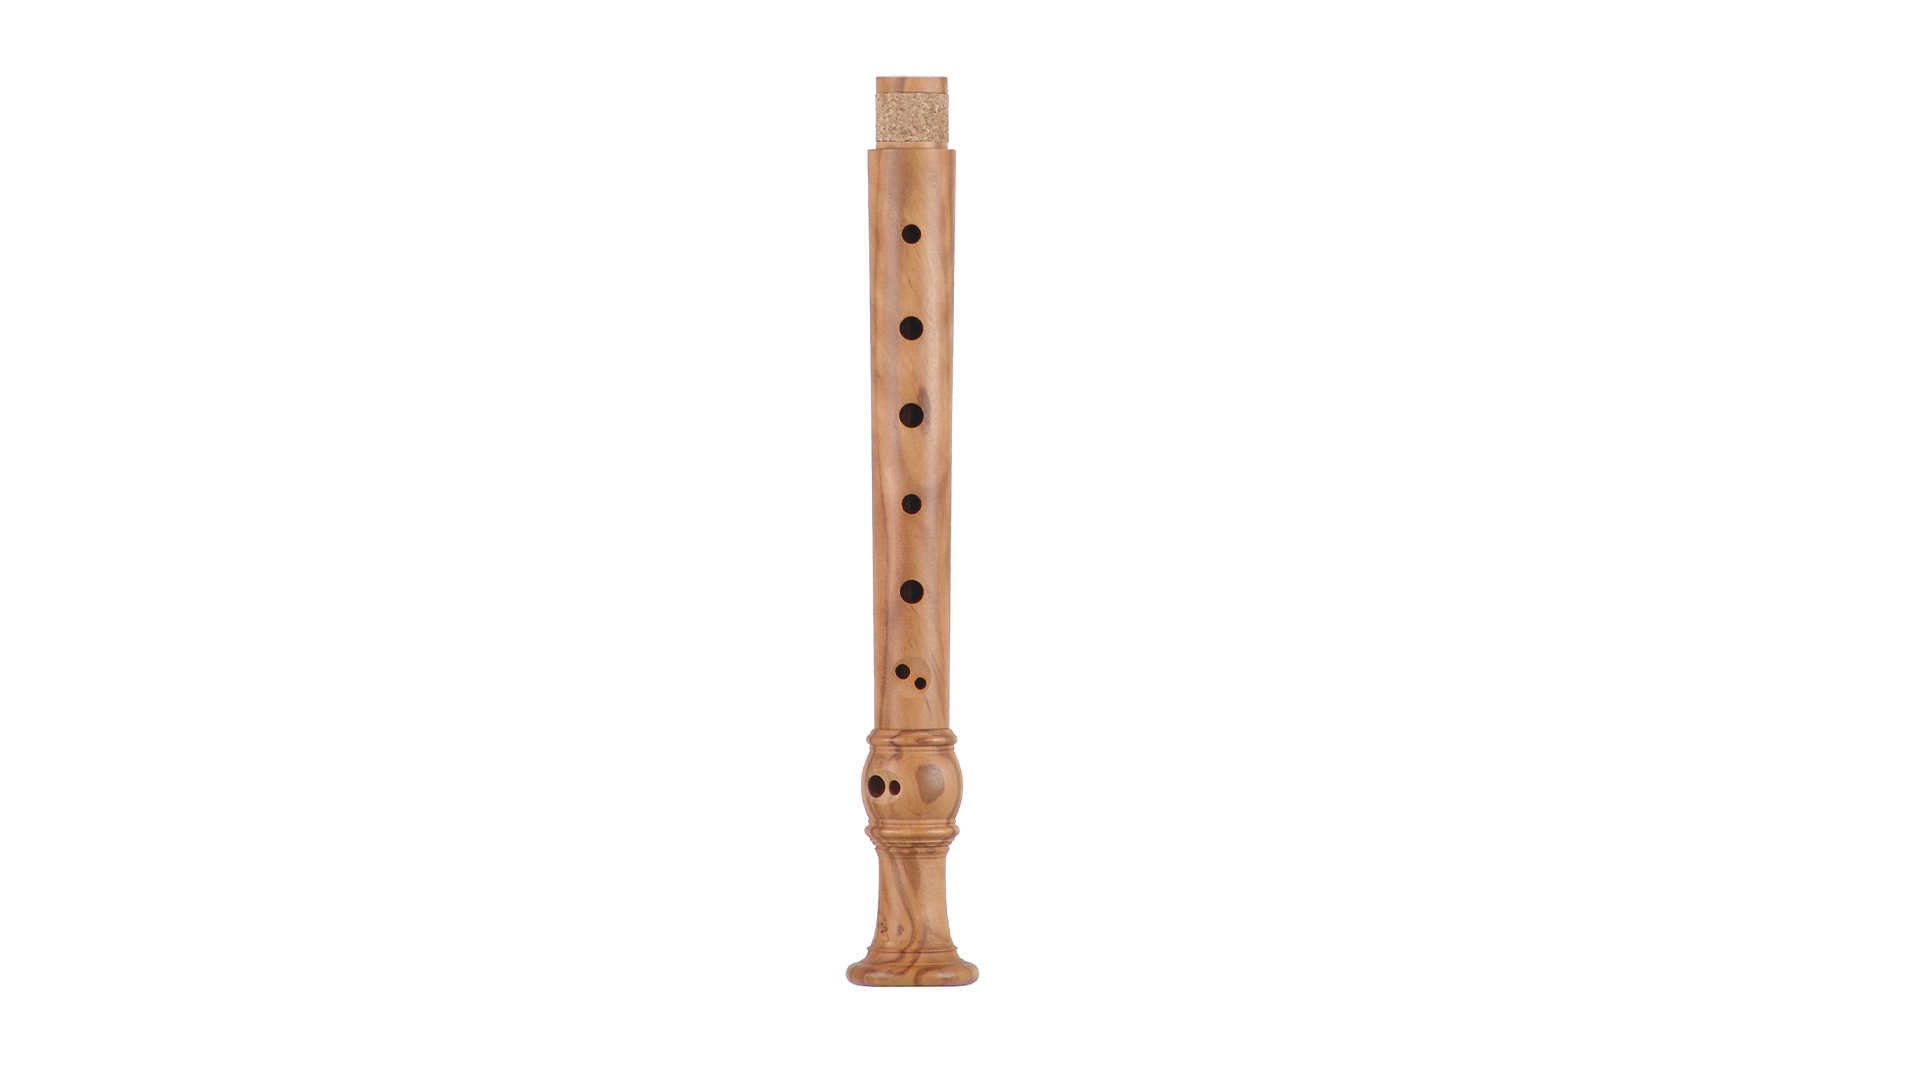 Huber, early baroque, "Master", soprano in c'', baroque double hole, 442 Hz, olive